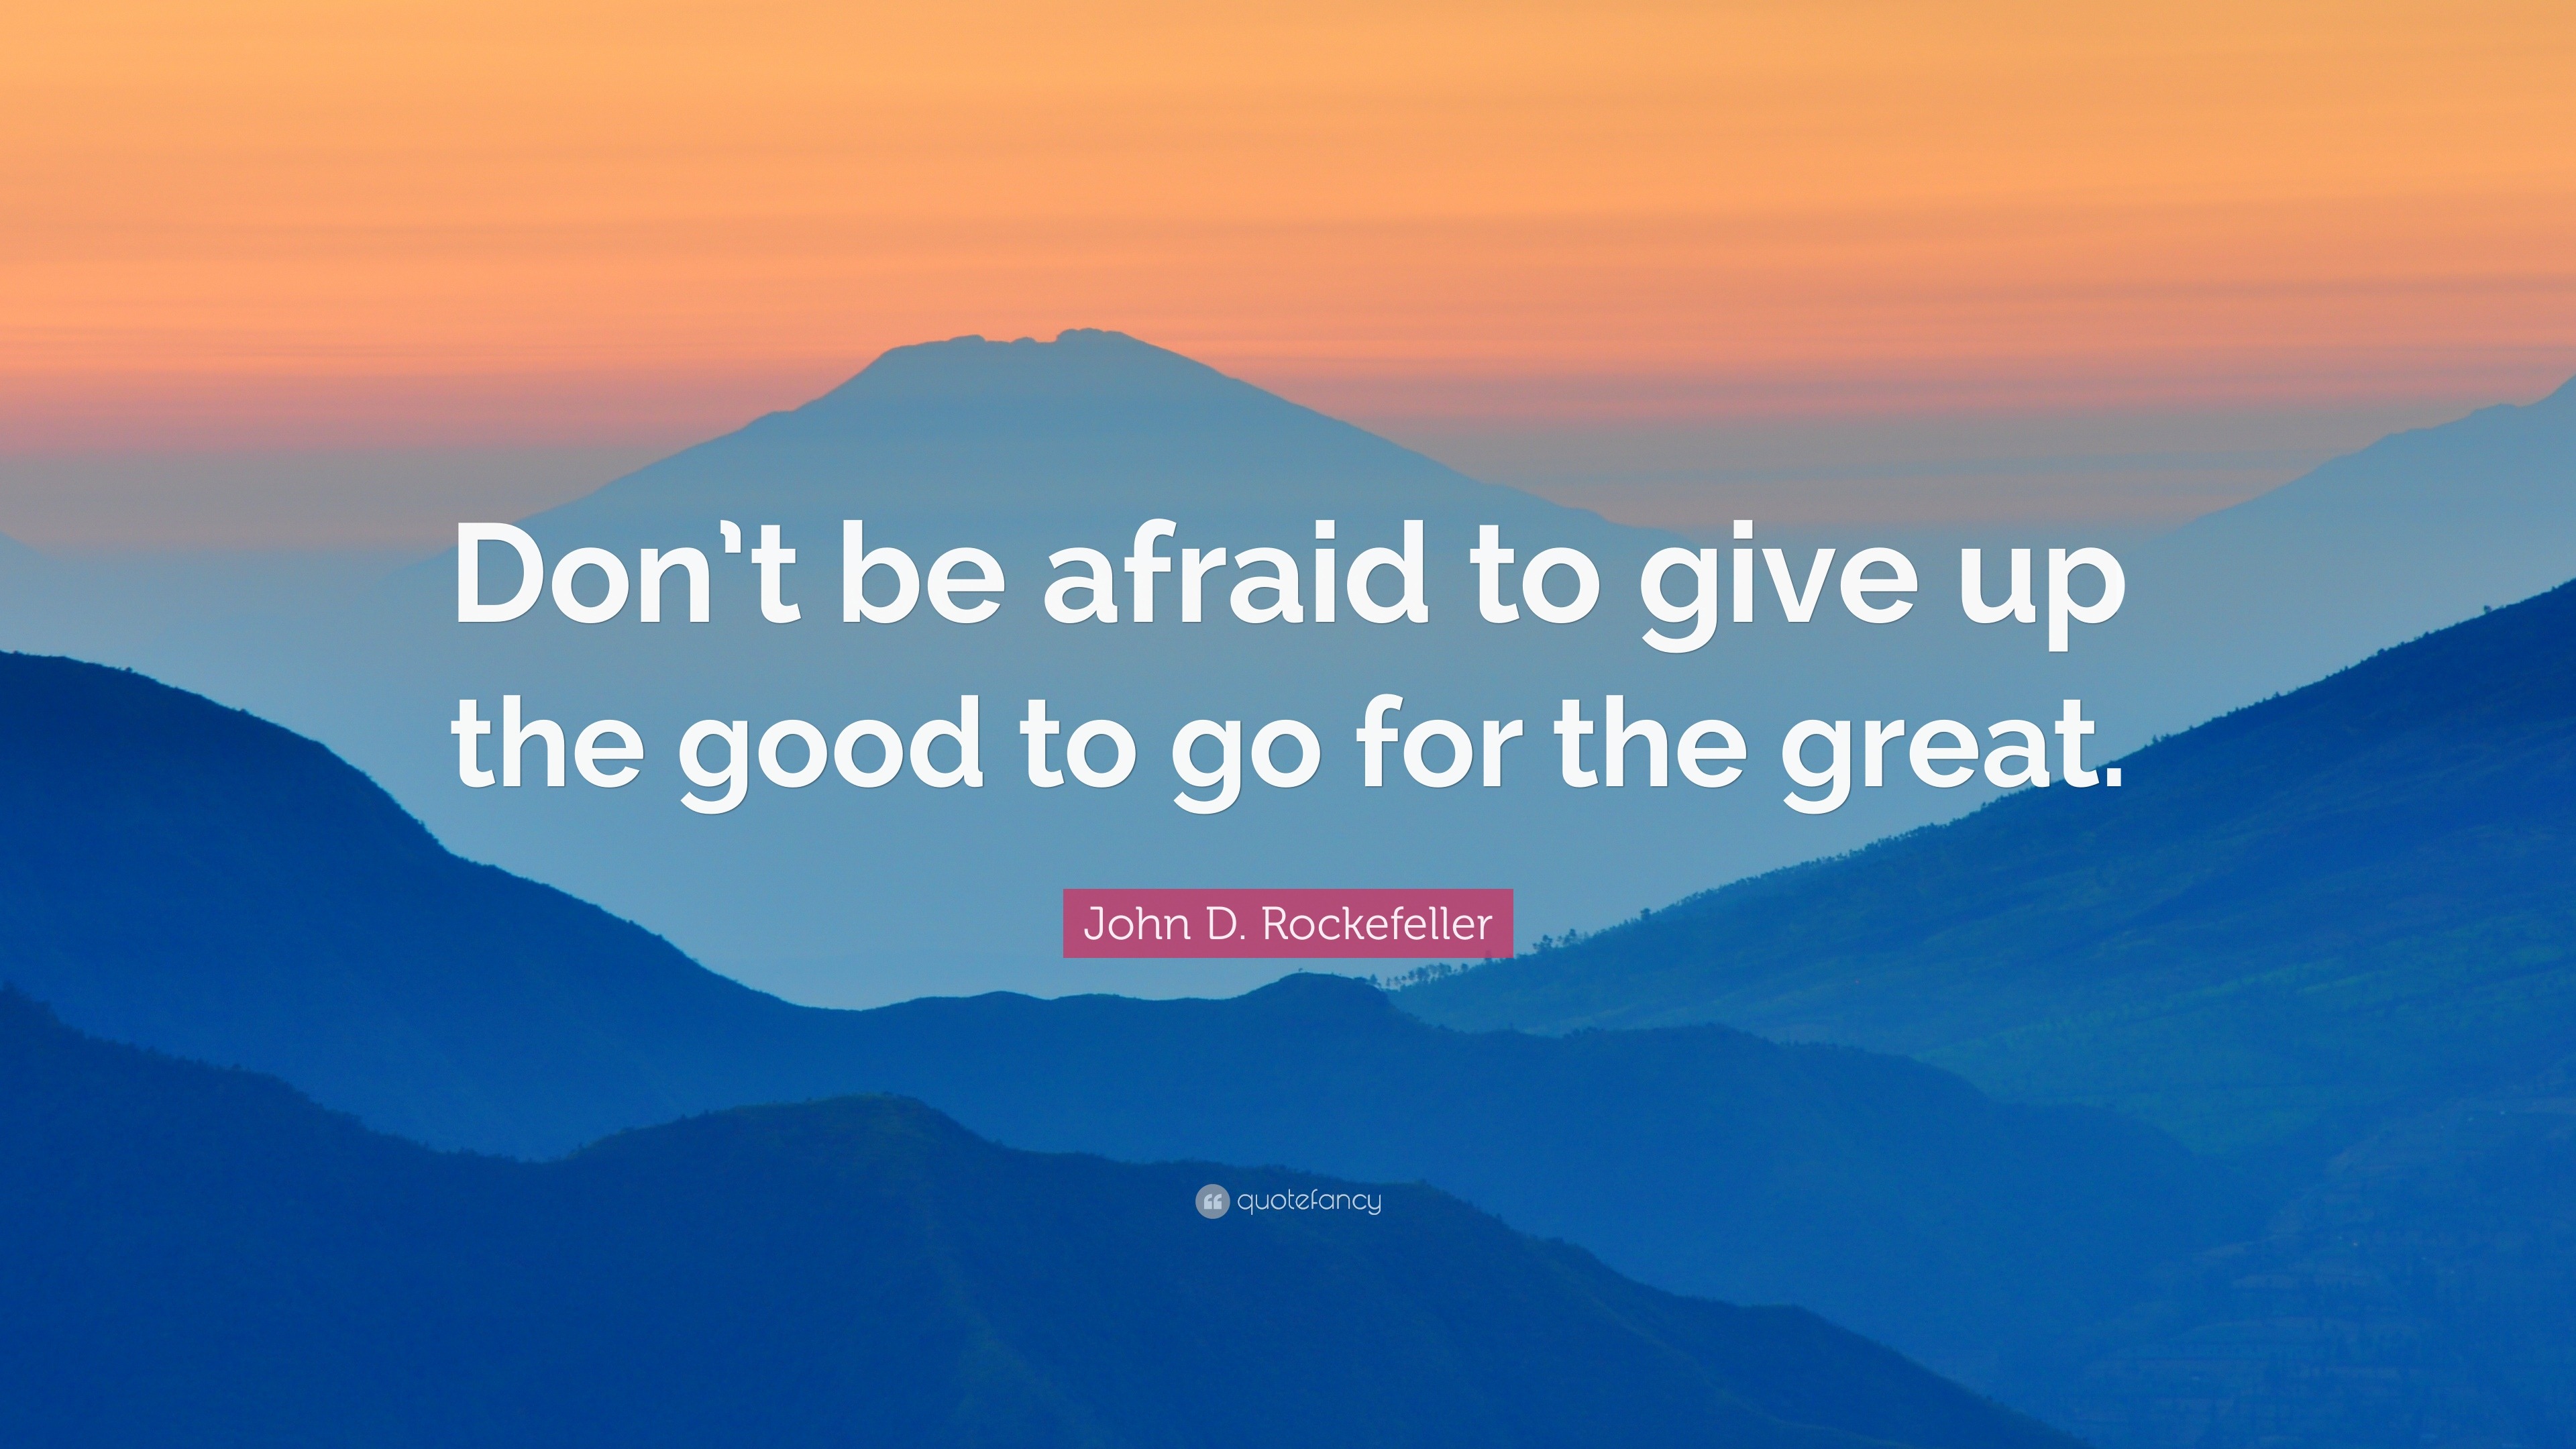 Artstudio – John D. Rockefeller Quote: Don't be afraid to give upthe good  to go for the great image free template